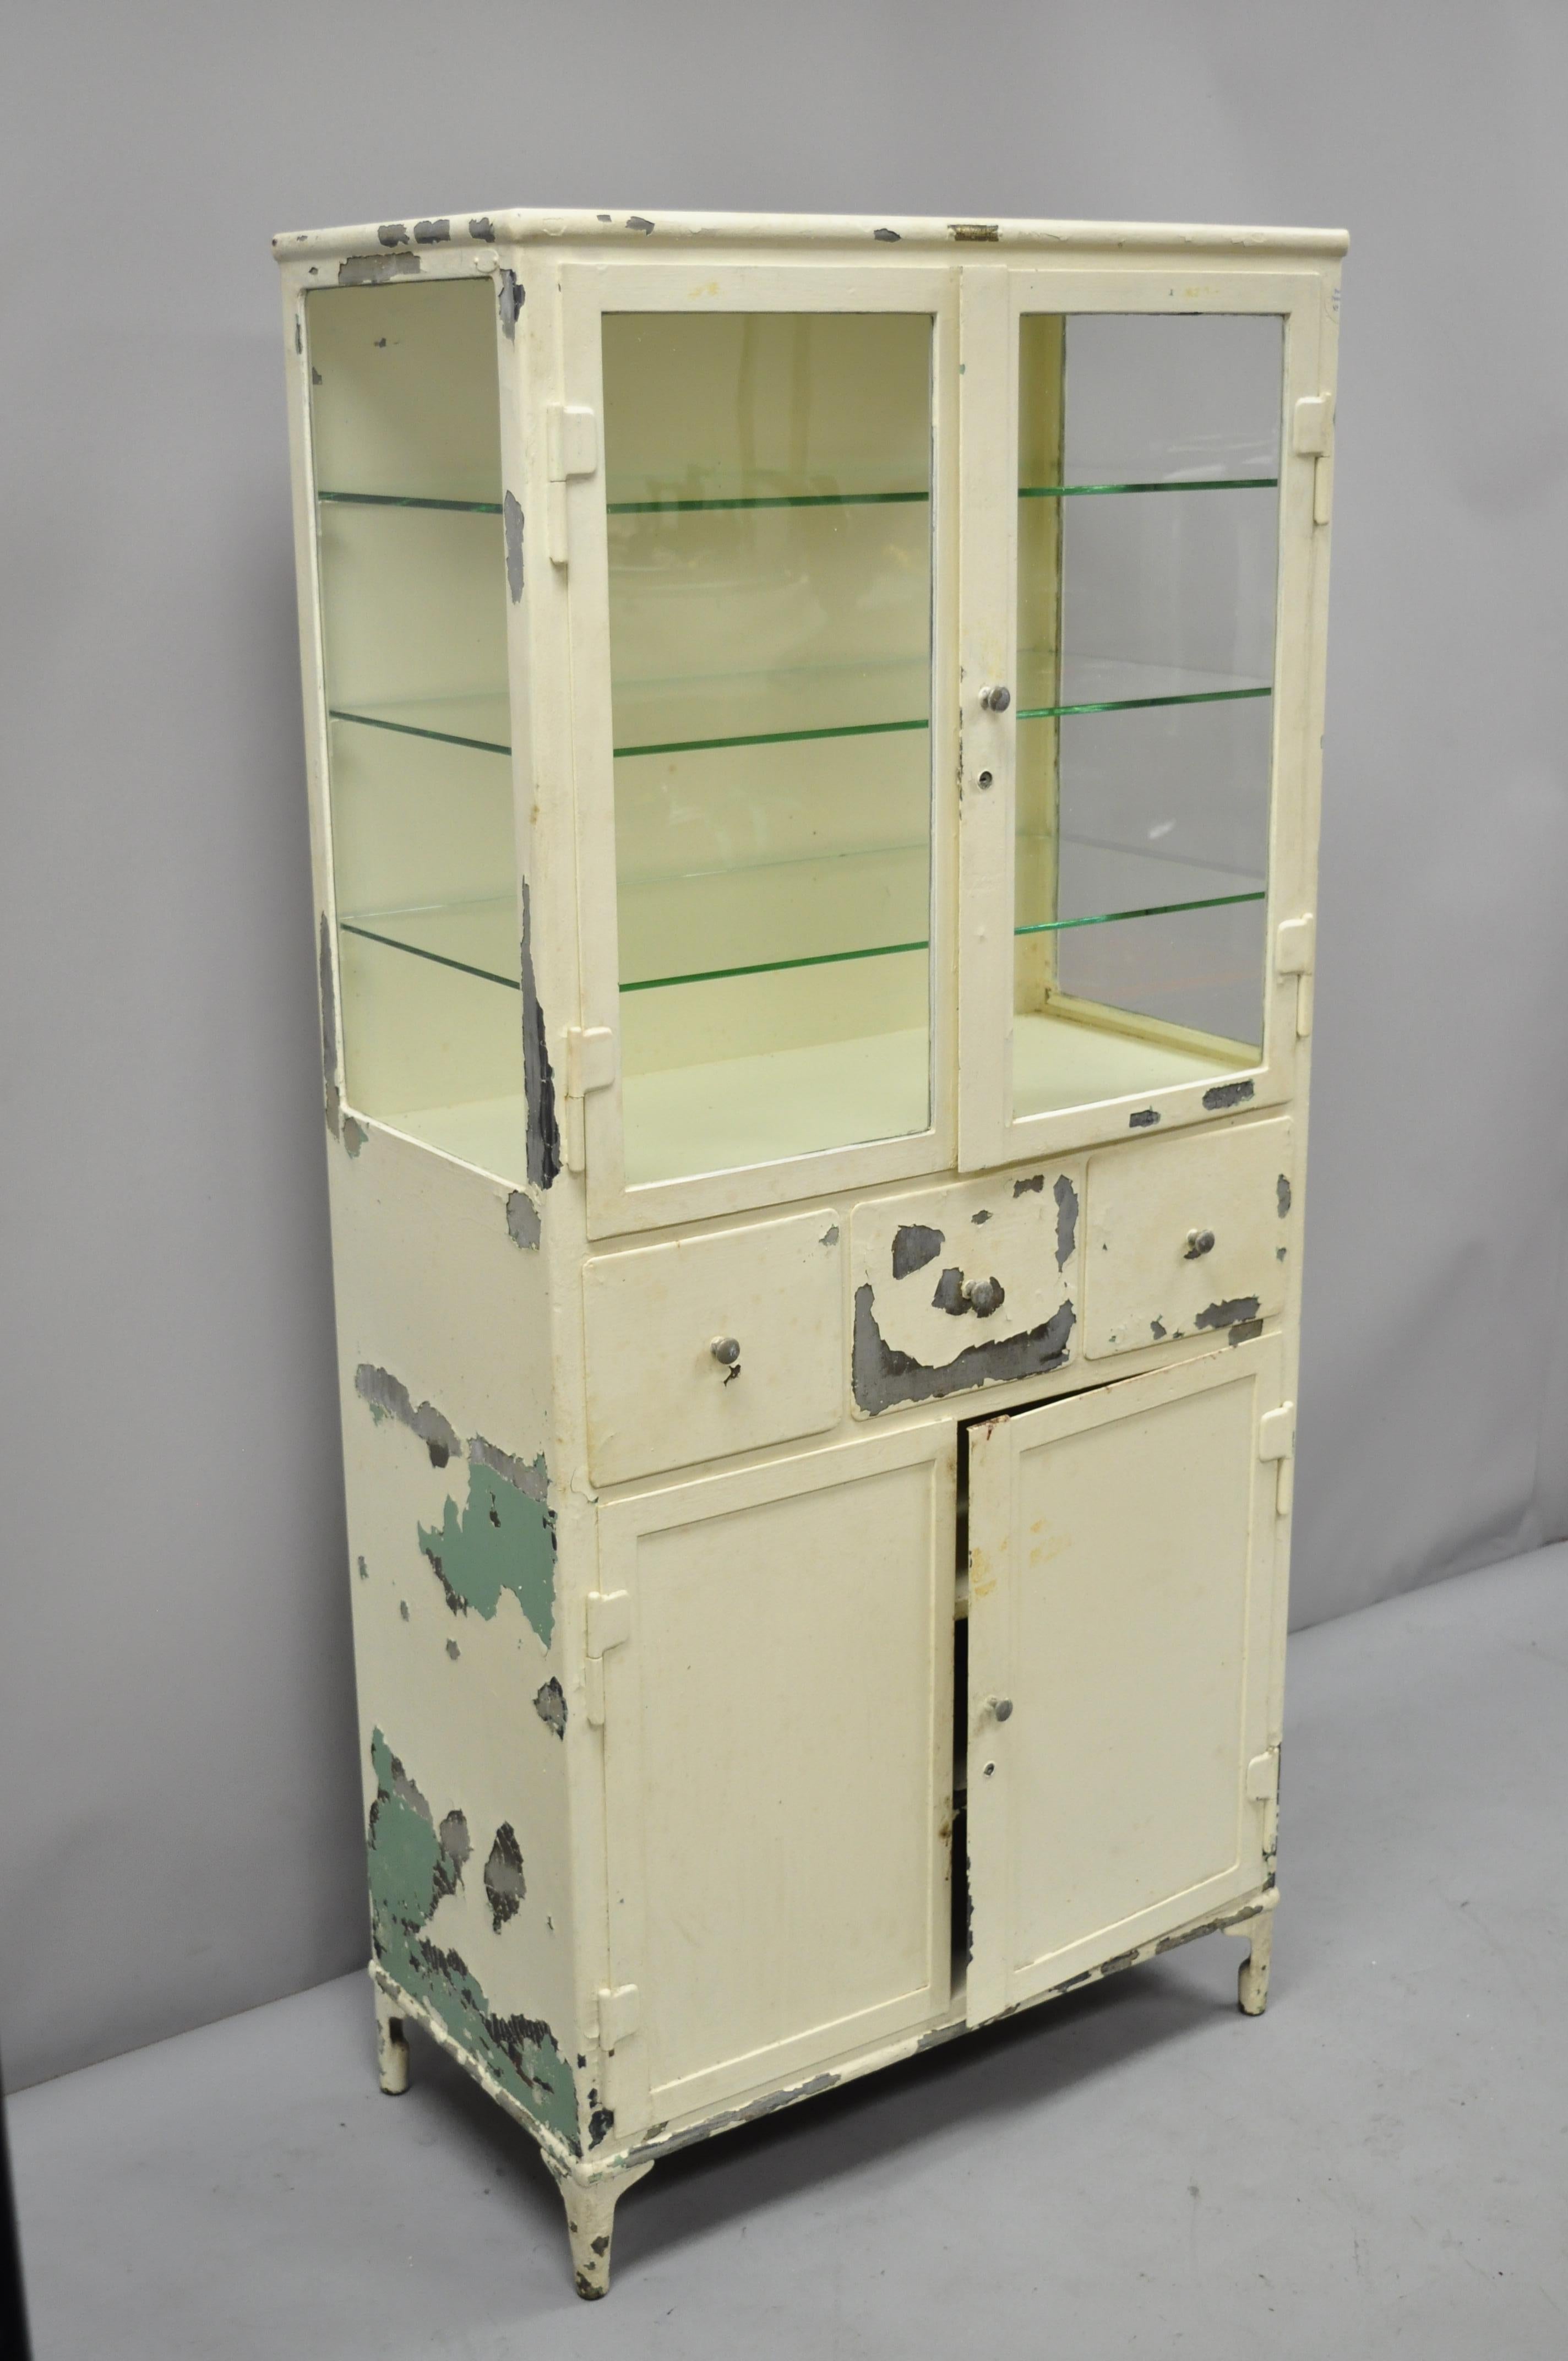 Antique Kny Scheerer steel metal glass medical dental pharmacy cabinet. Item features glass sides, metal frame, 4 swing doors, original tag, no key but unlocked, 3 drawers, 3 glass shelves, circa early 1900s. Measurements: 64.5